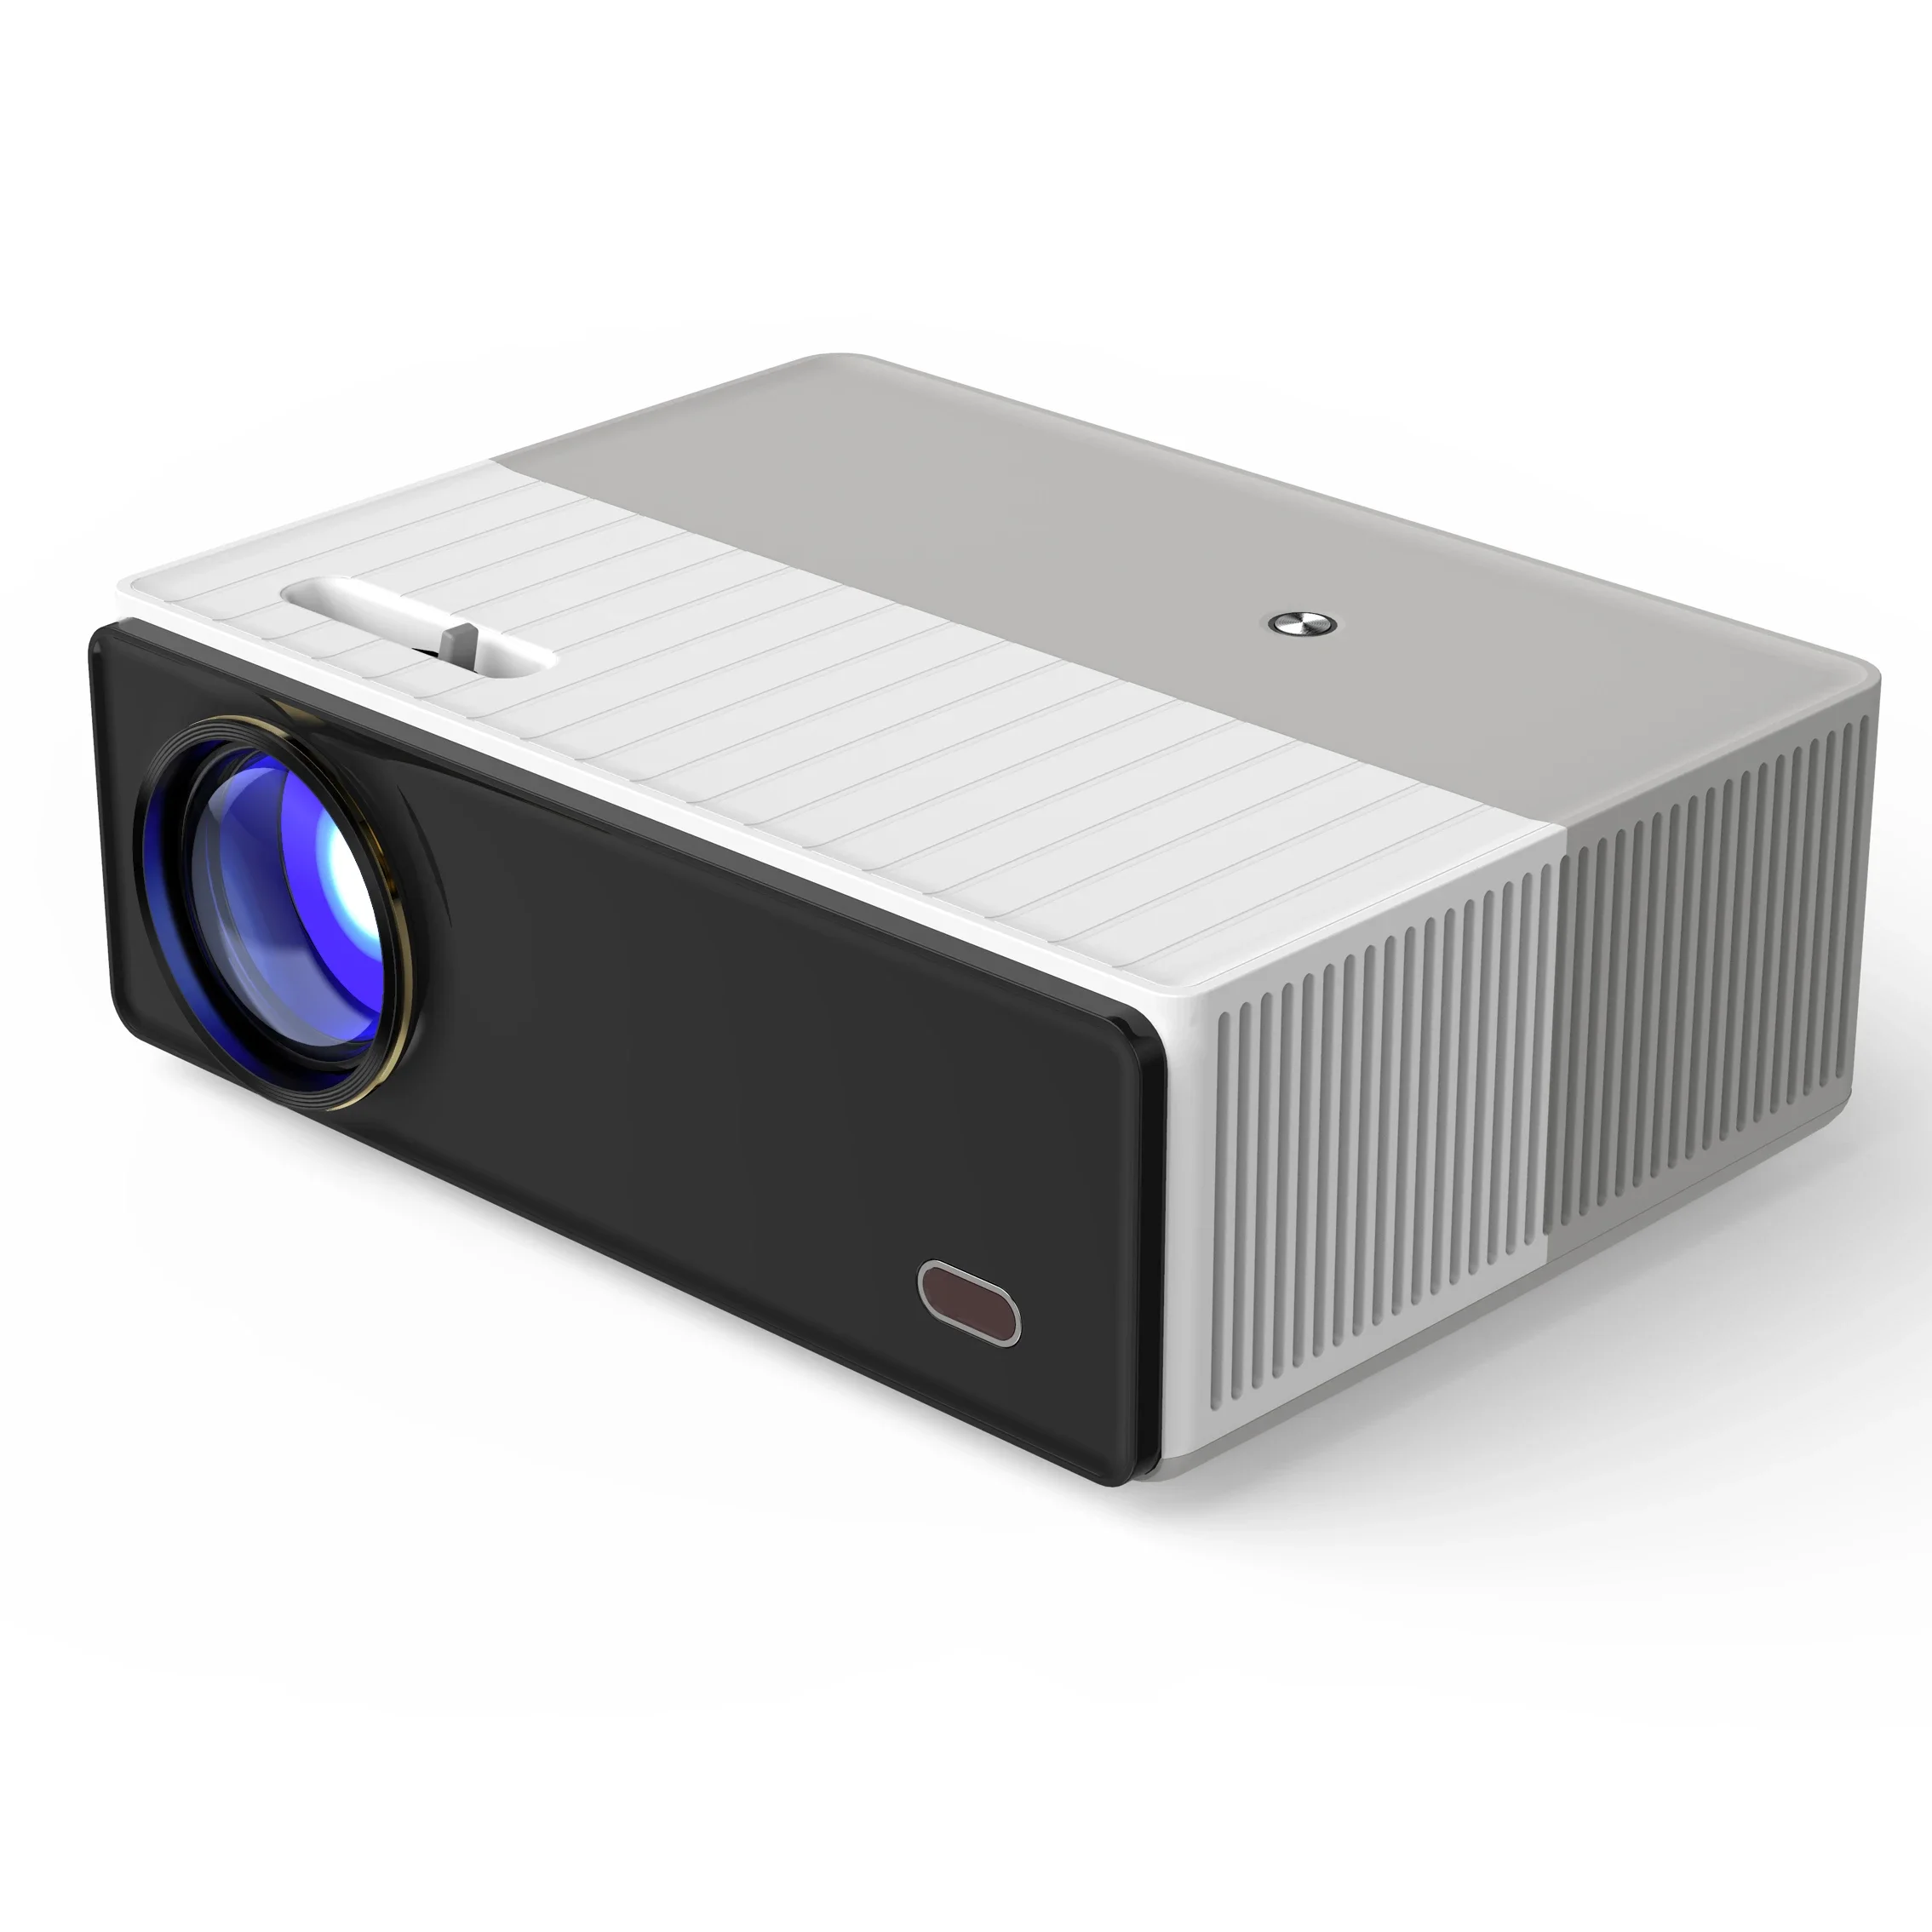 vivibright D5000 wholesale projector business&education office player home theater video digital Led high brightness projector